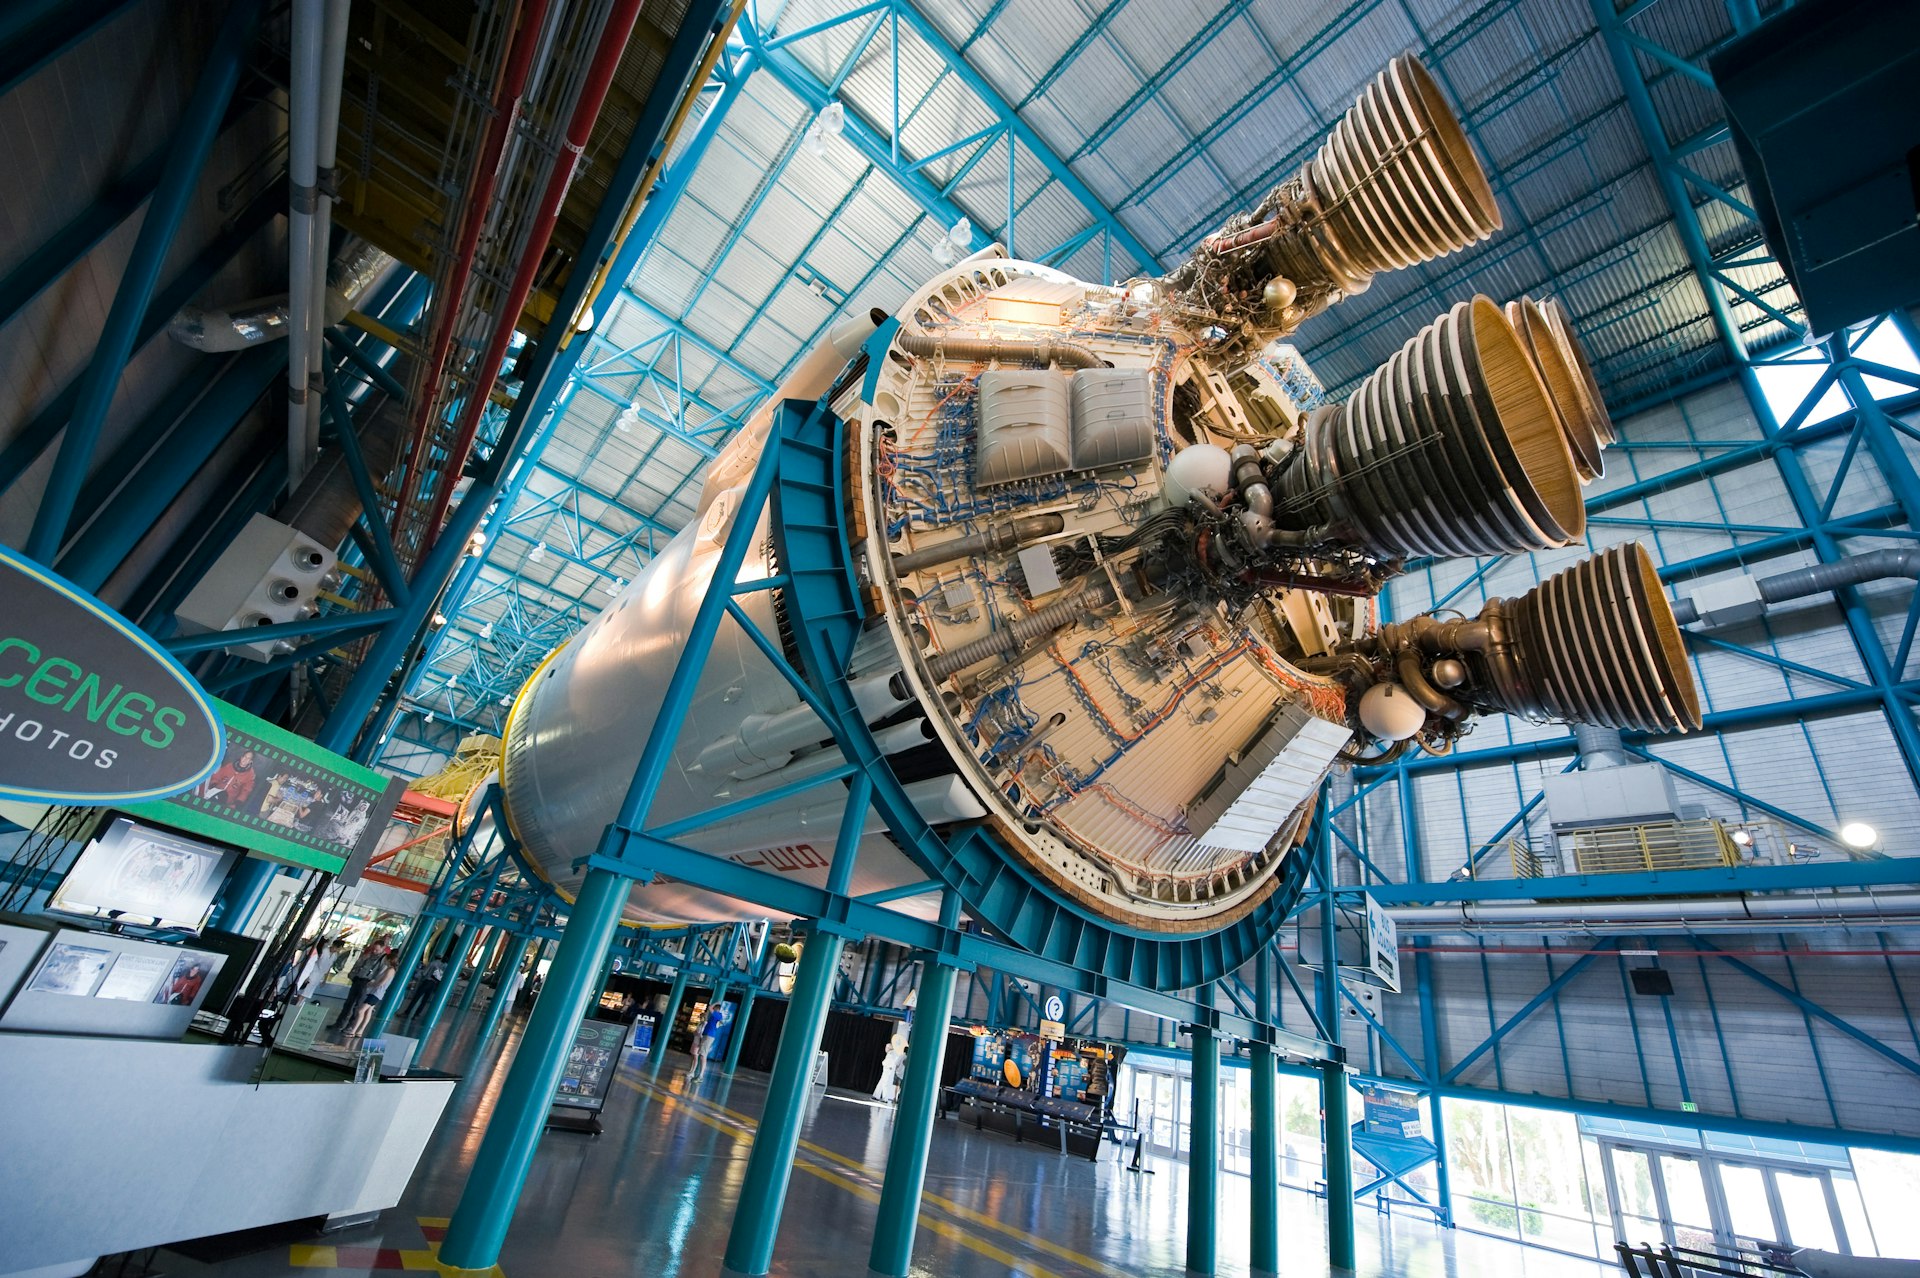 An exhibit of a spacecraft hanging from the ceiling